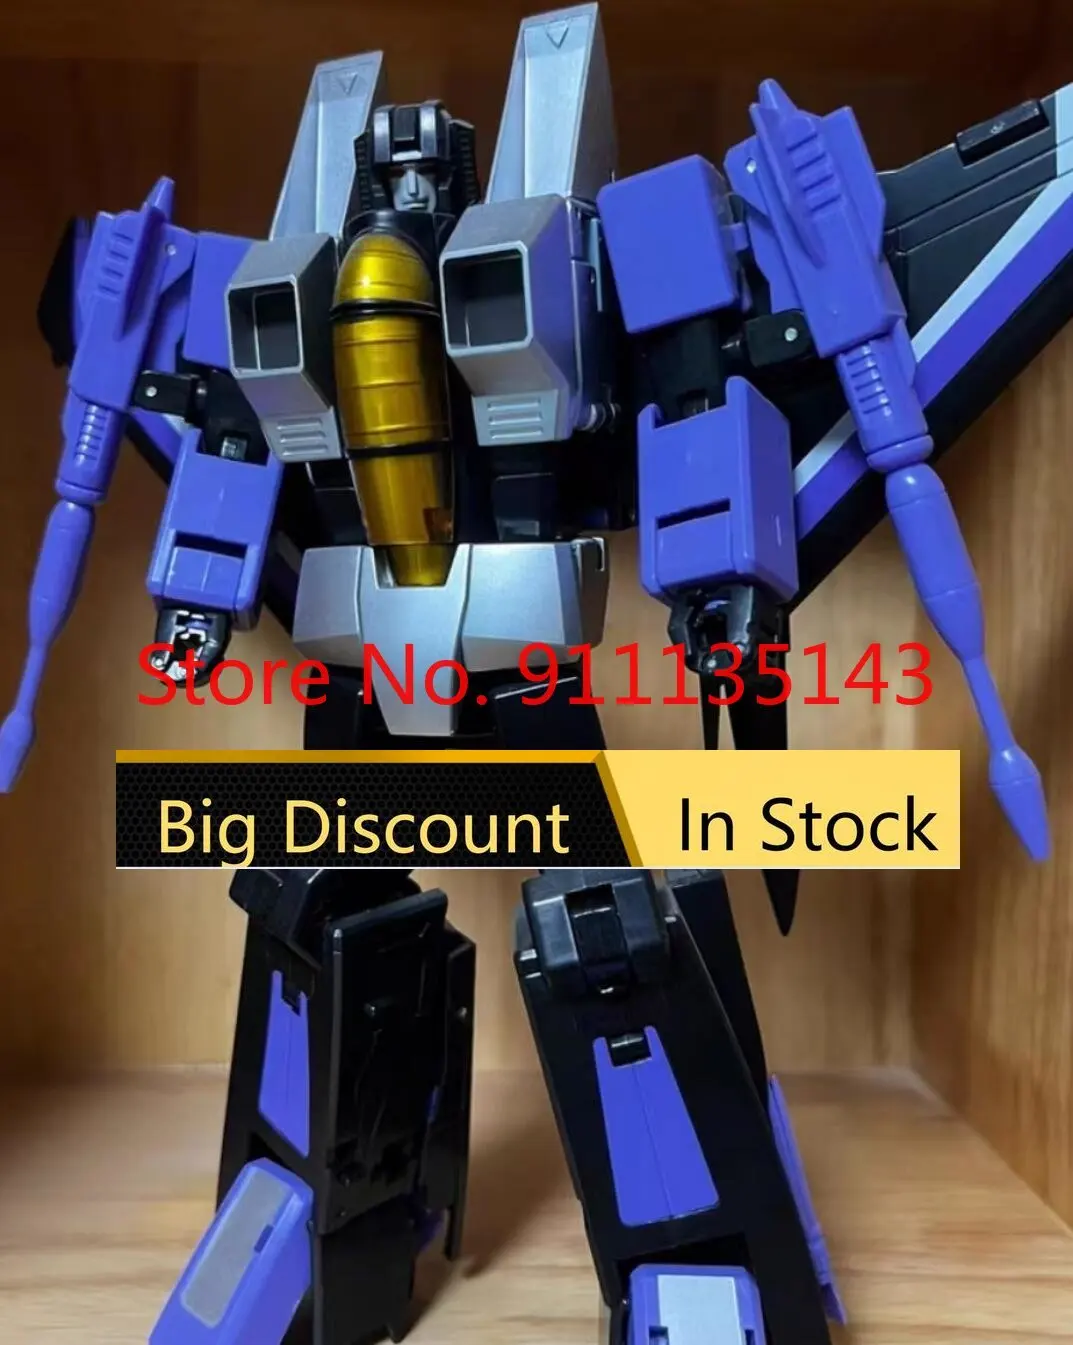 

Maketoys Mtrm-12ex Skycrow 2022 Version 3rd Party Transformation Toys Anime Action Figure Toy Deformed Model Robot In Stock Gift